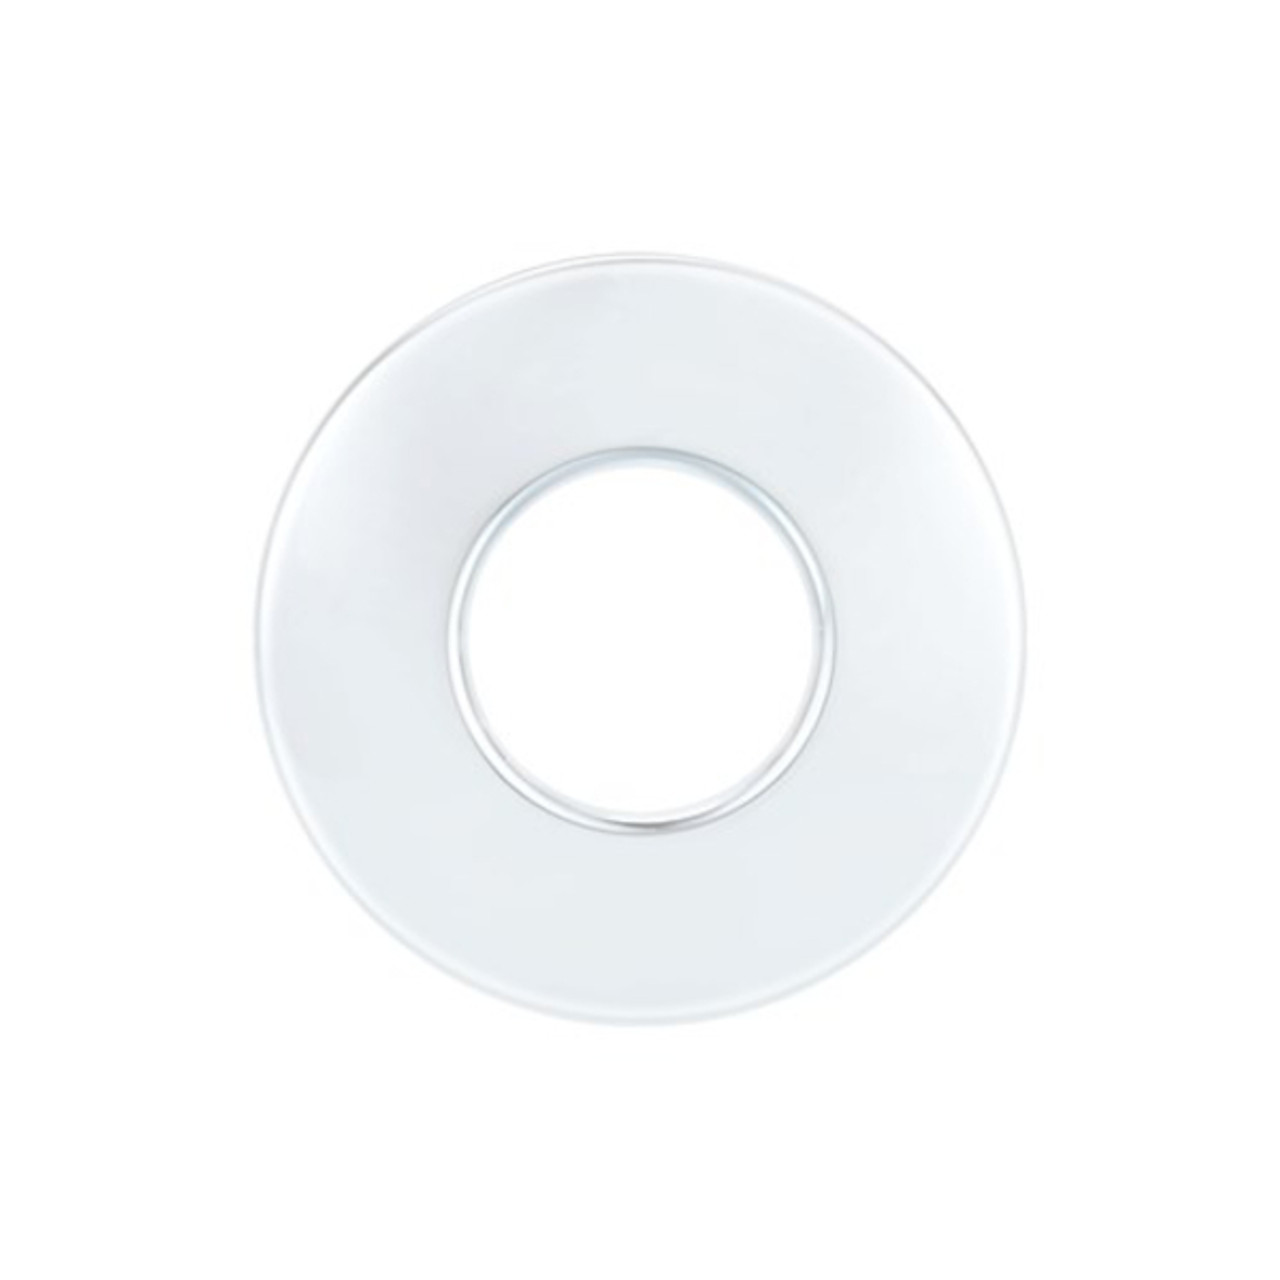 Polished Chrome IP65 Bezel for Start Eco LED Fixed Fire Rated Downlight